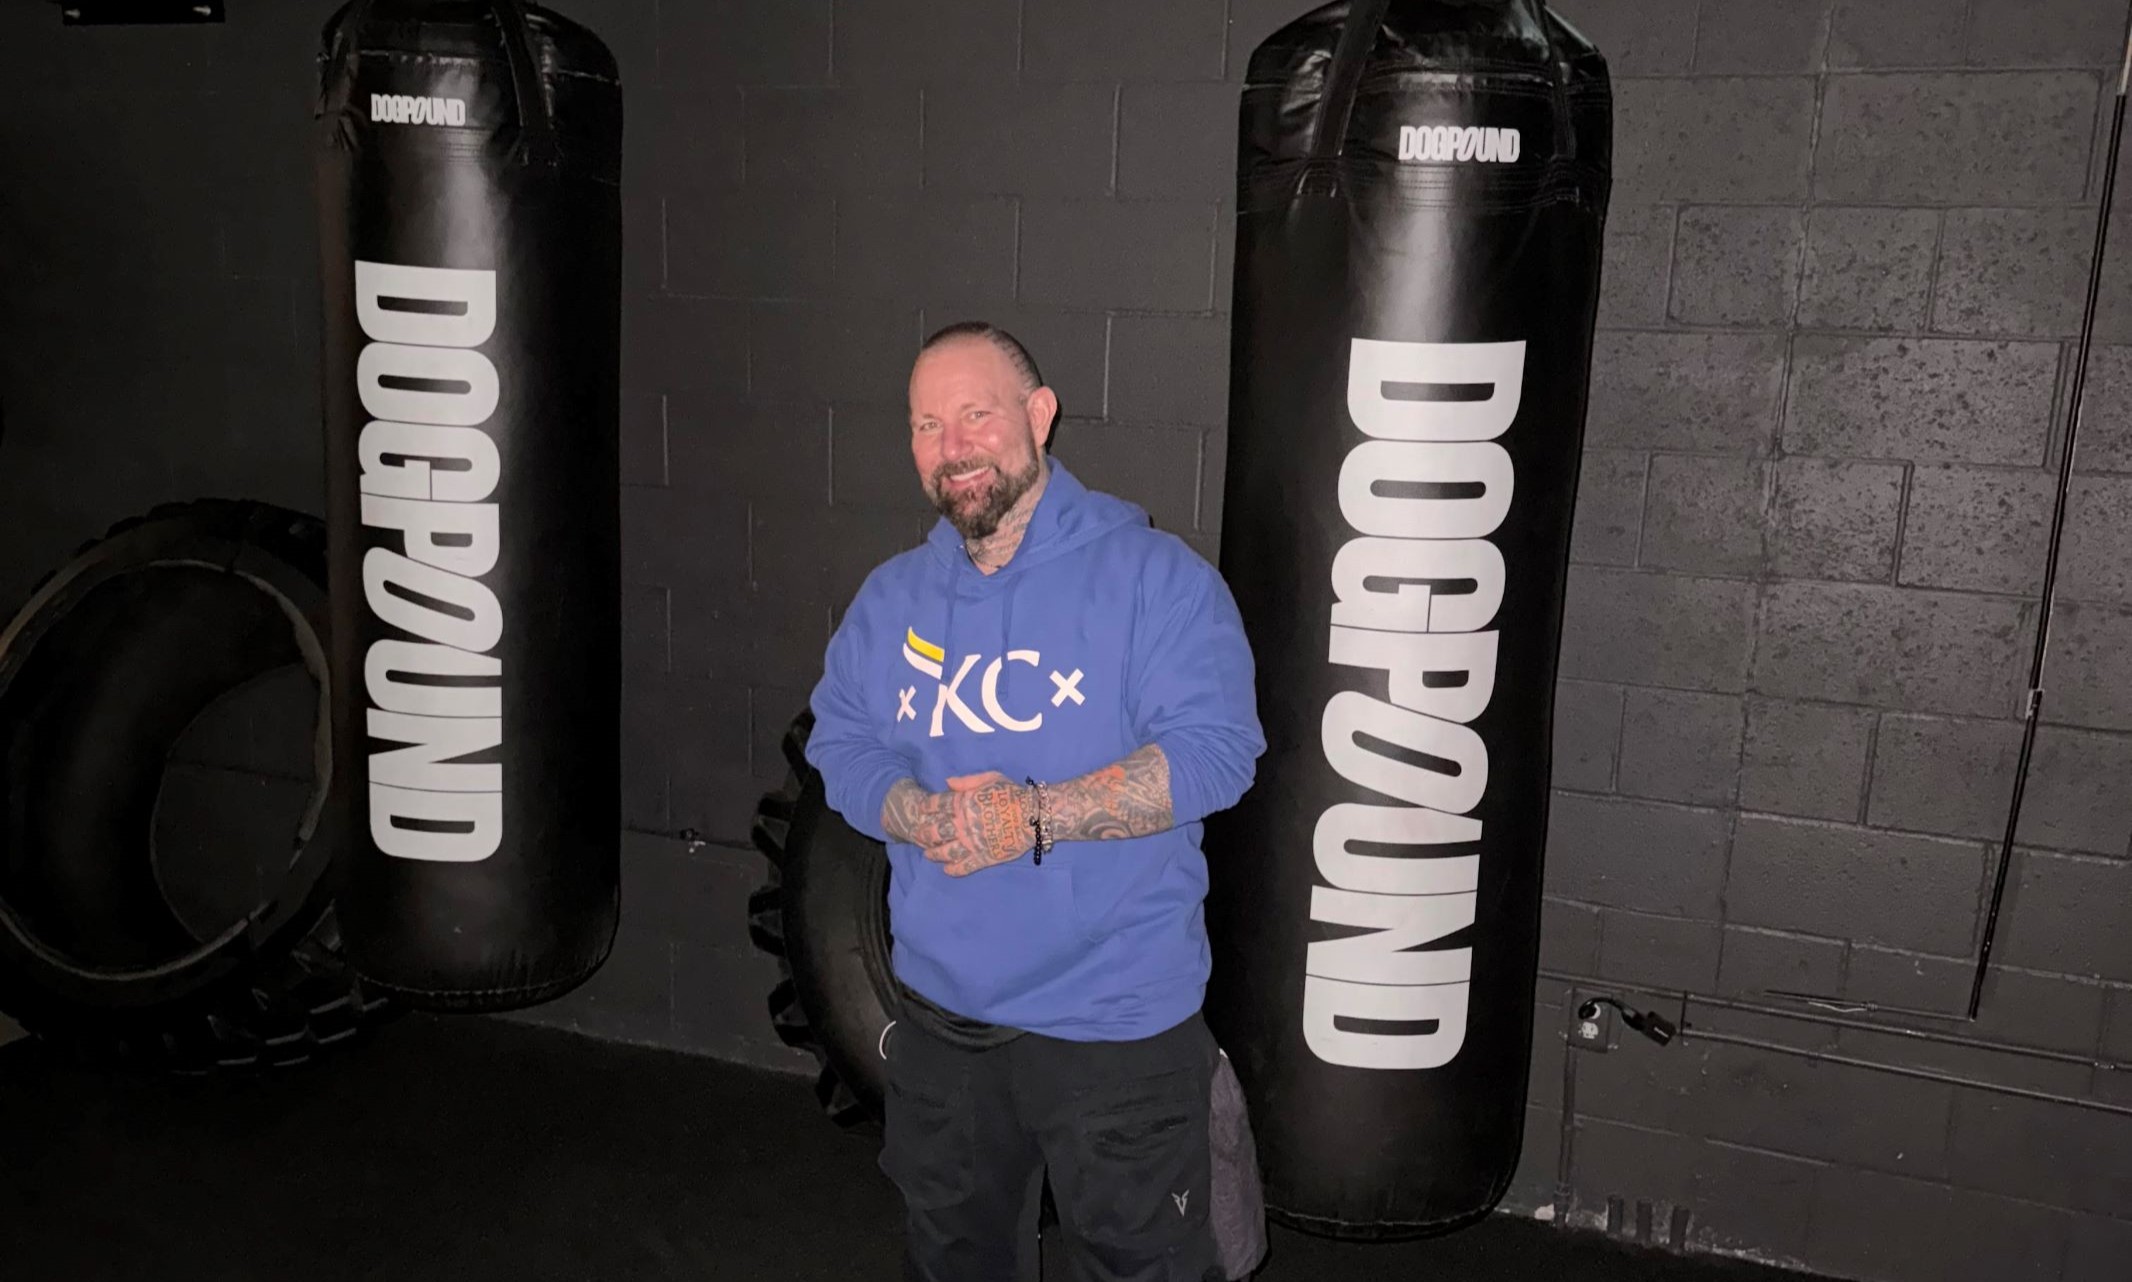 Taylor Swift and other celebrities' fitness trainer UMKC Alum Kirk Myers wearing a blue KC Mobb Made Sweatshirt in front of boxing sandbags at his gym dogpound